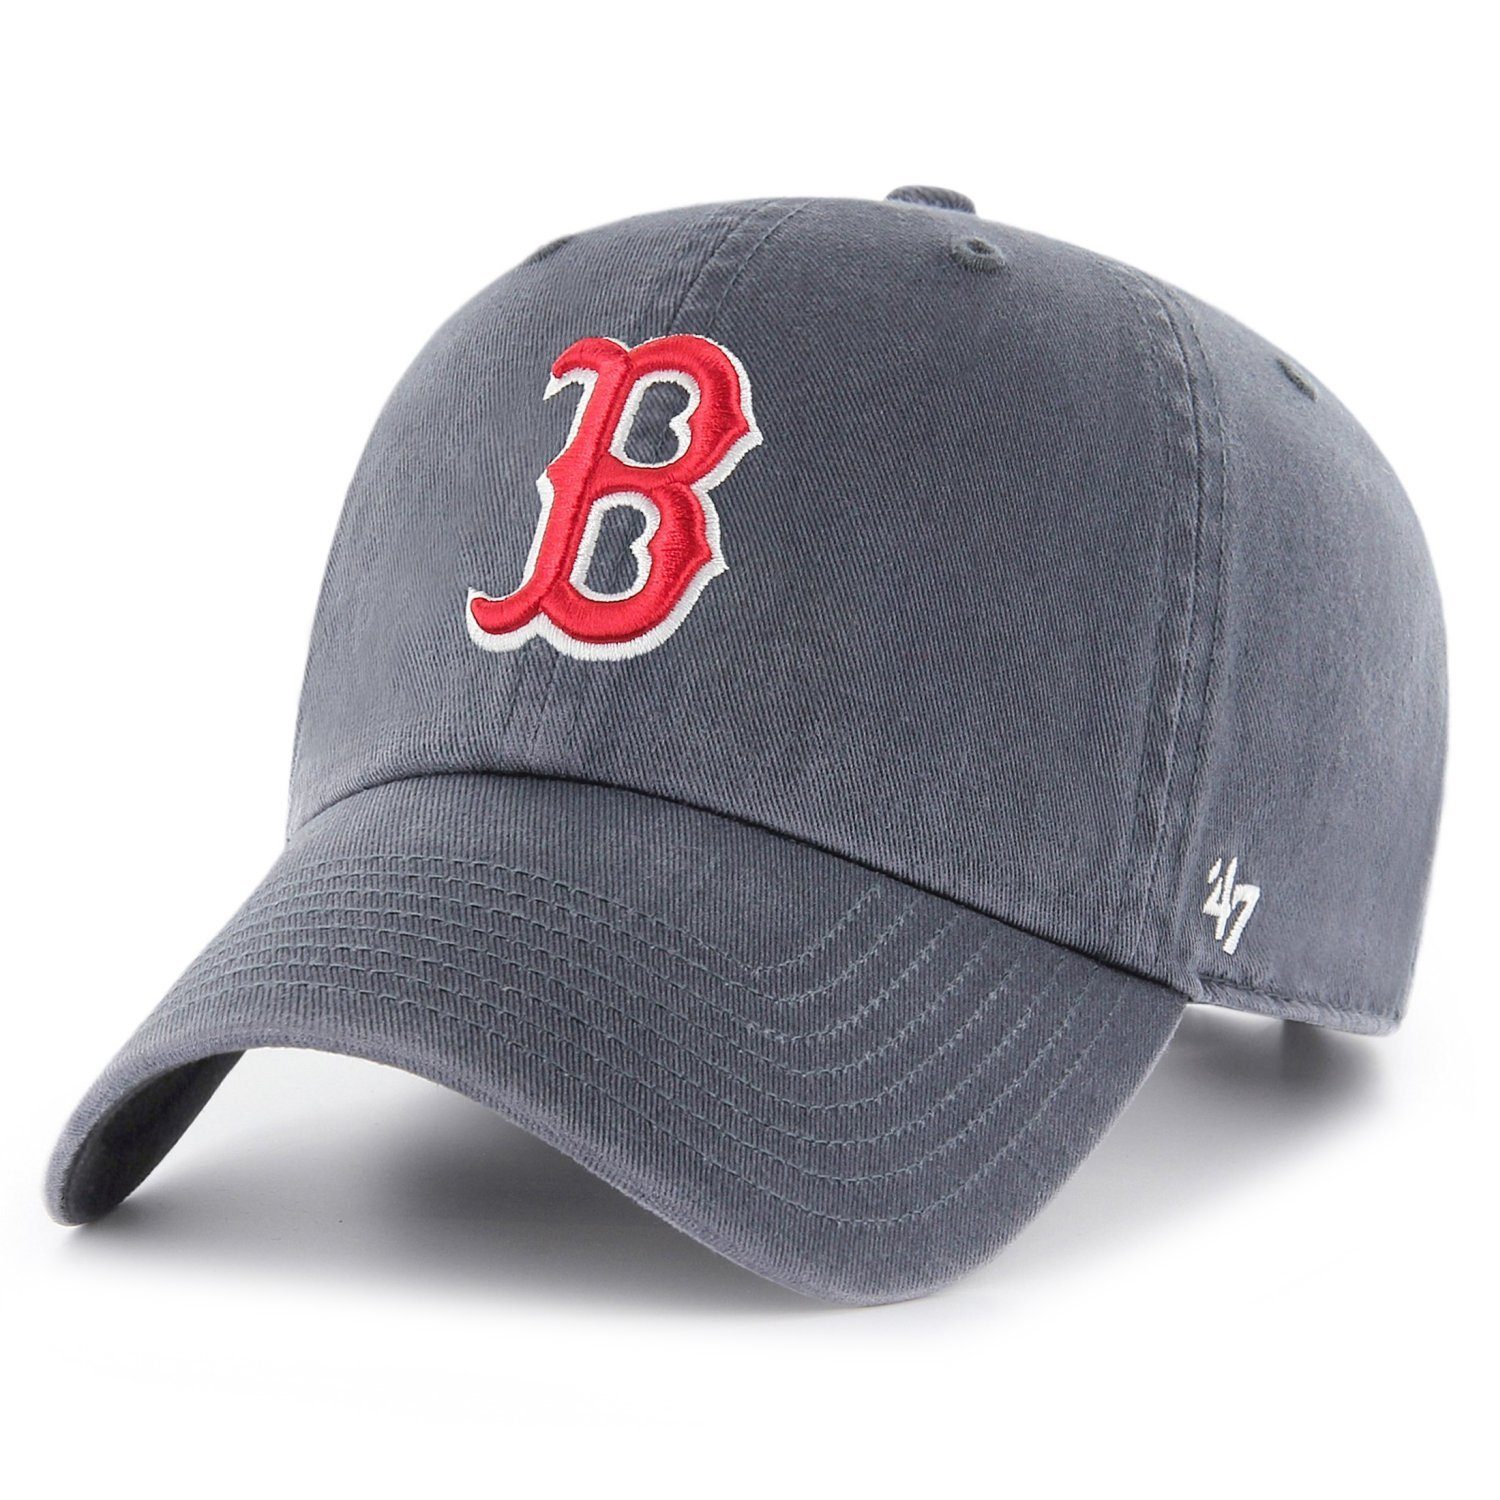 Boston '47 Red Cap Relaxed Brand UP Trucker CLEAN Fit Sox